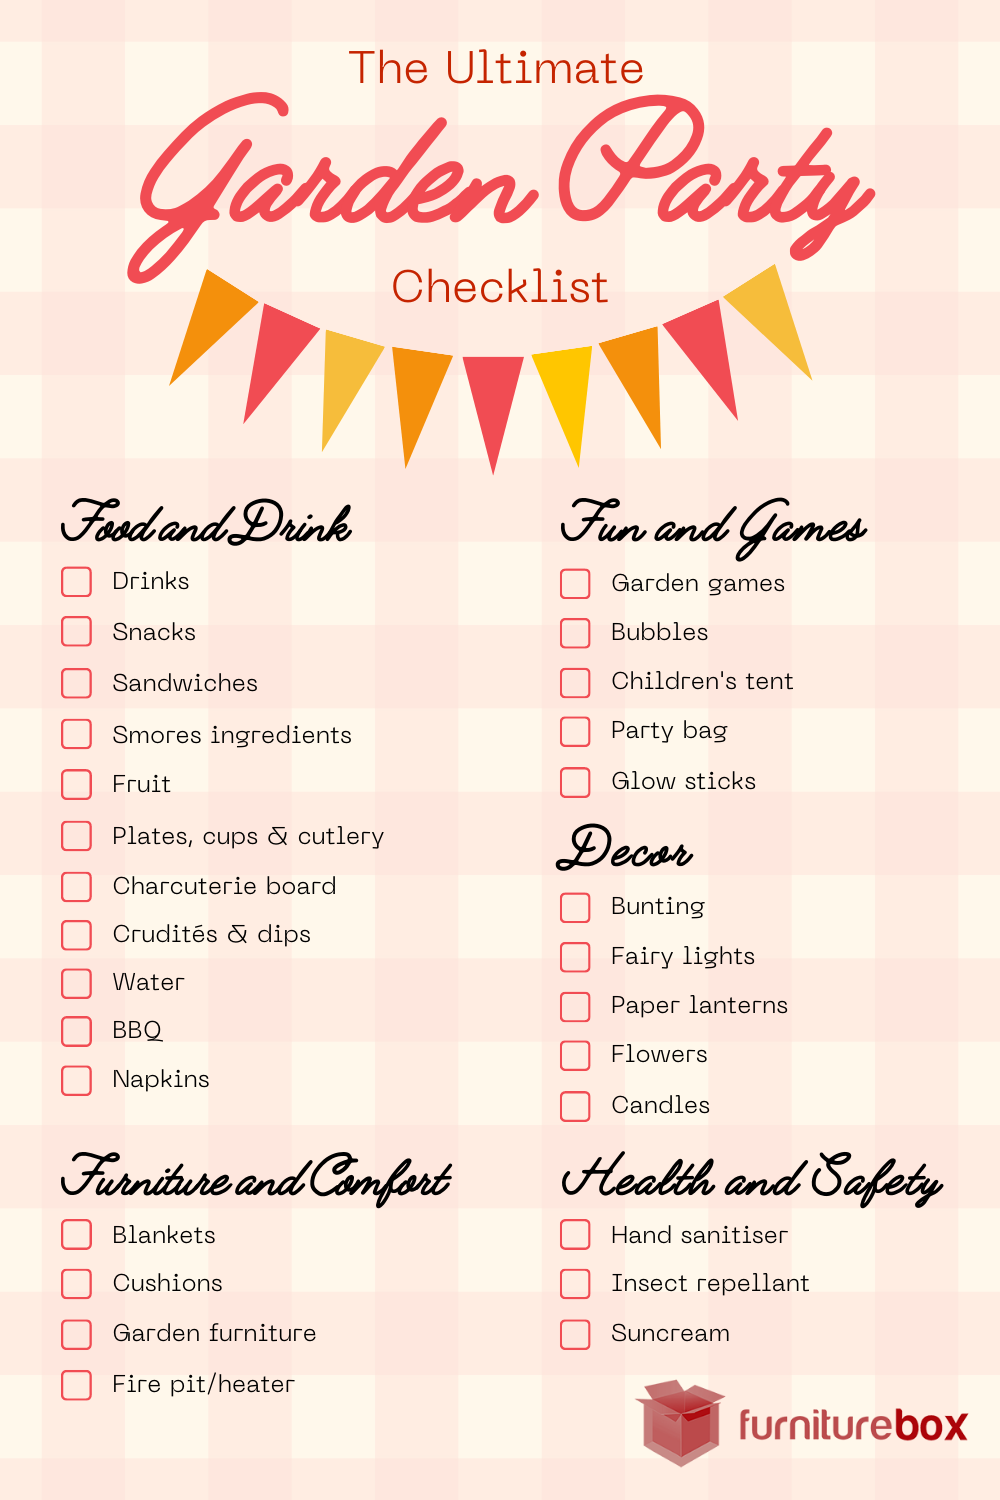 The Ultimate Garden Party Checklist: A tick list of garden party essentials including food and drink, games, garden party furniture, garden party decorations and health and safety considerations. 